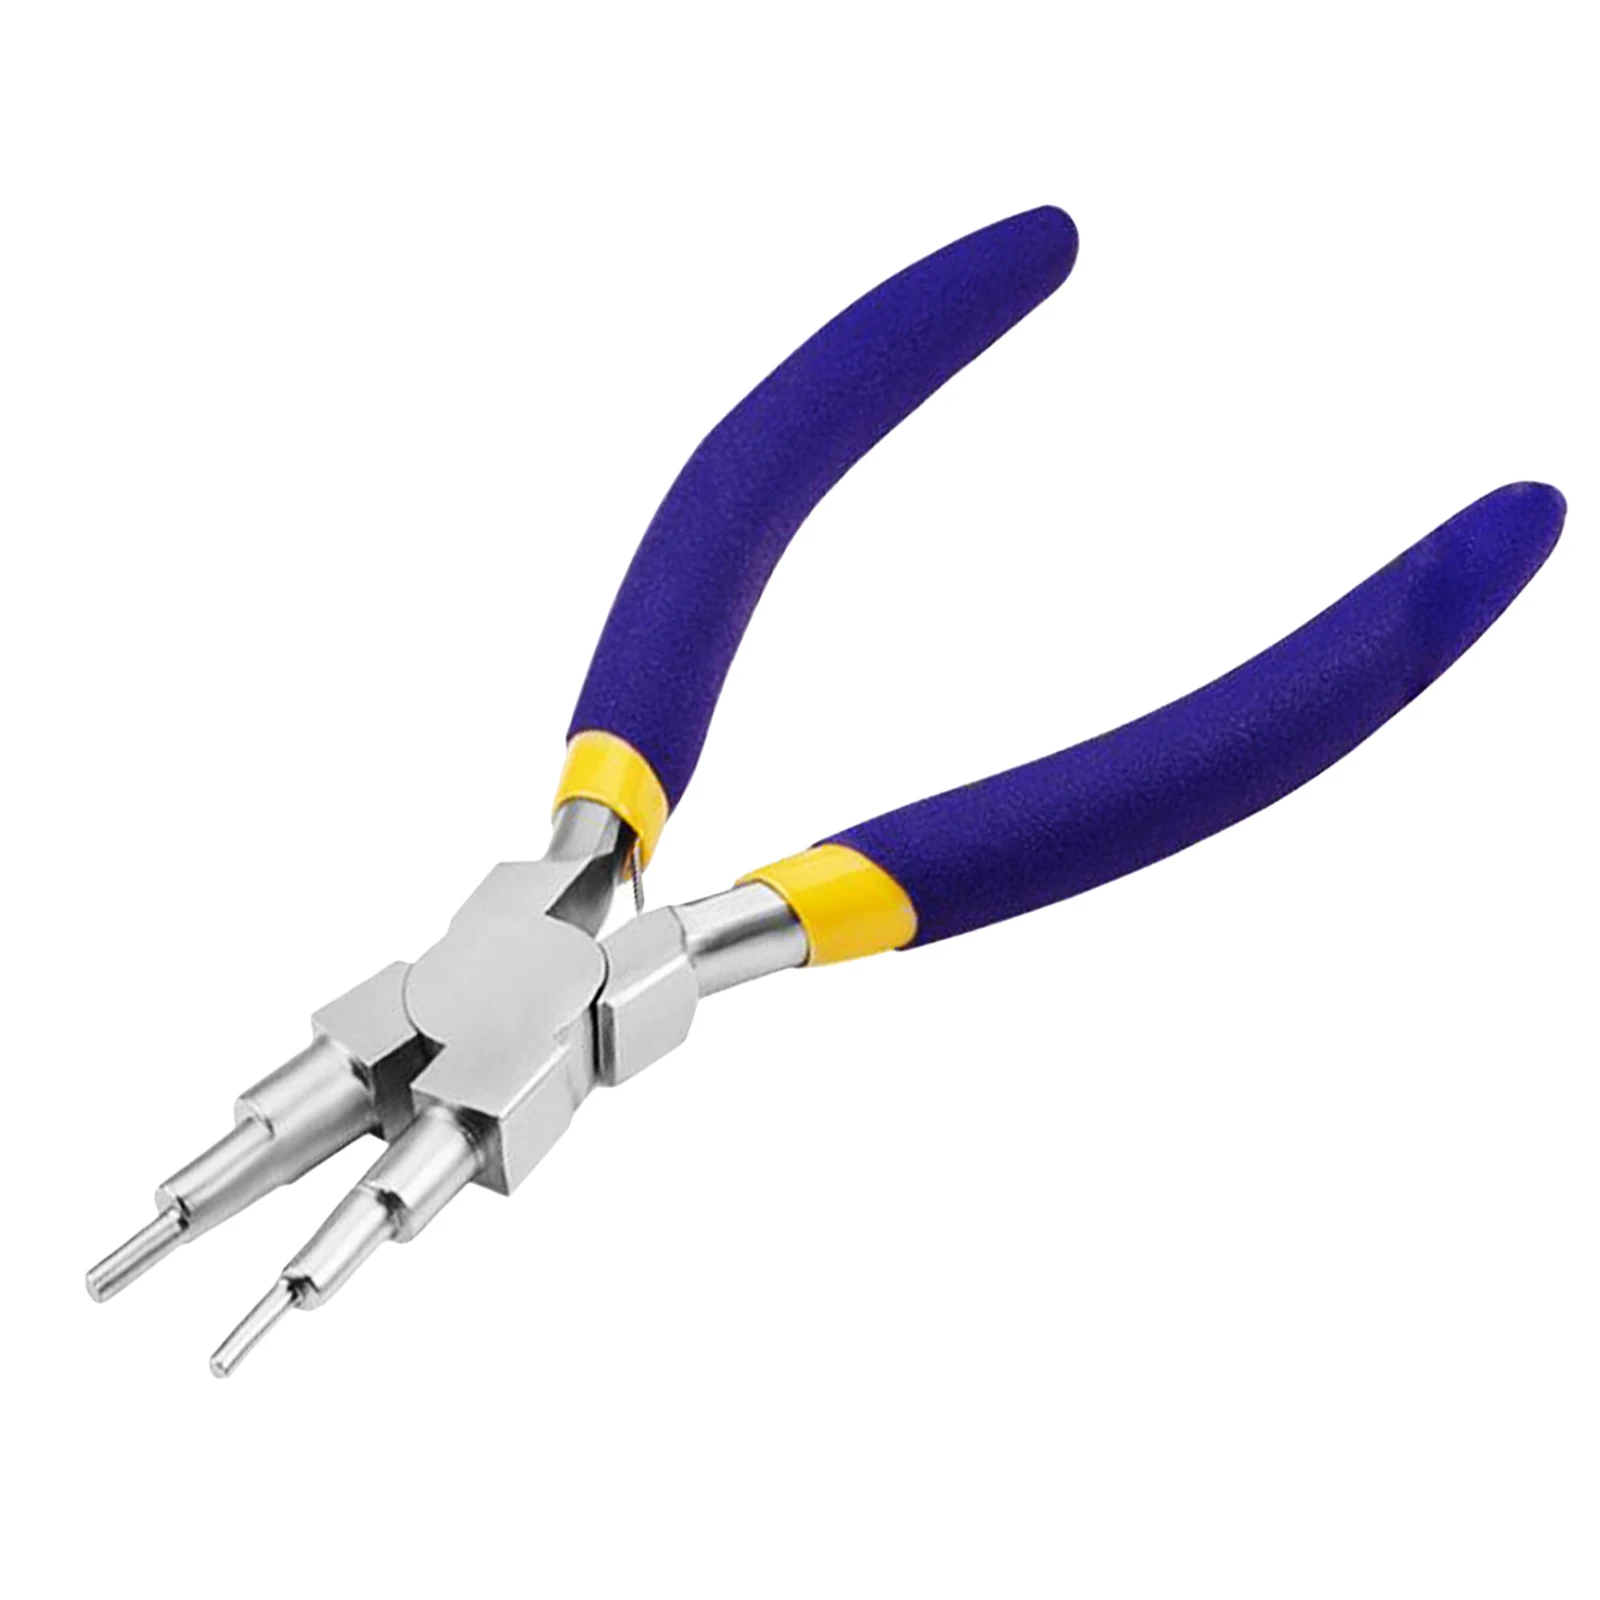 6 in 1 Wire Looping Forming Bail Making Pliers Non-slip Comfort Grip Handle